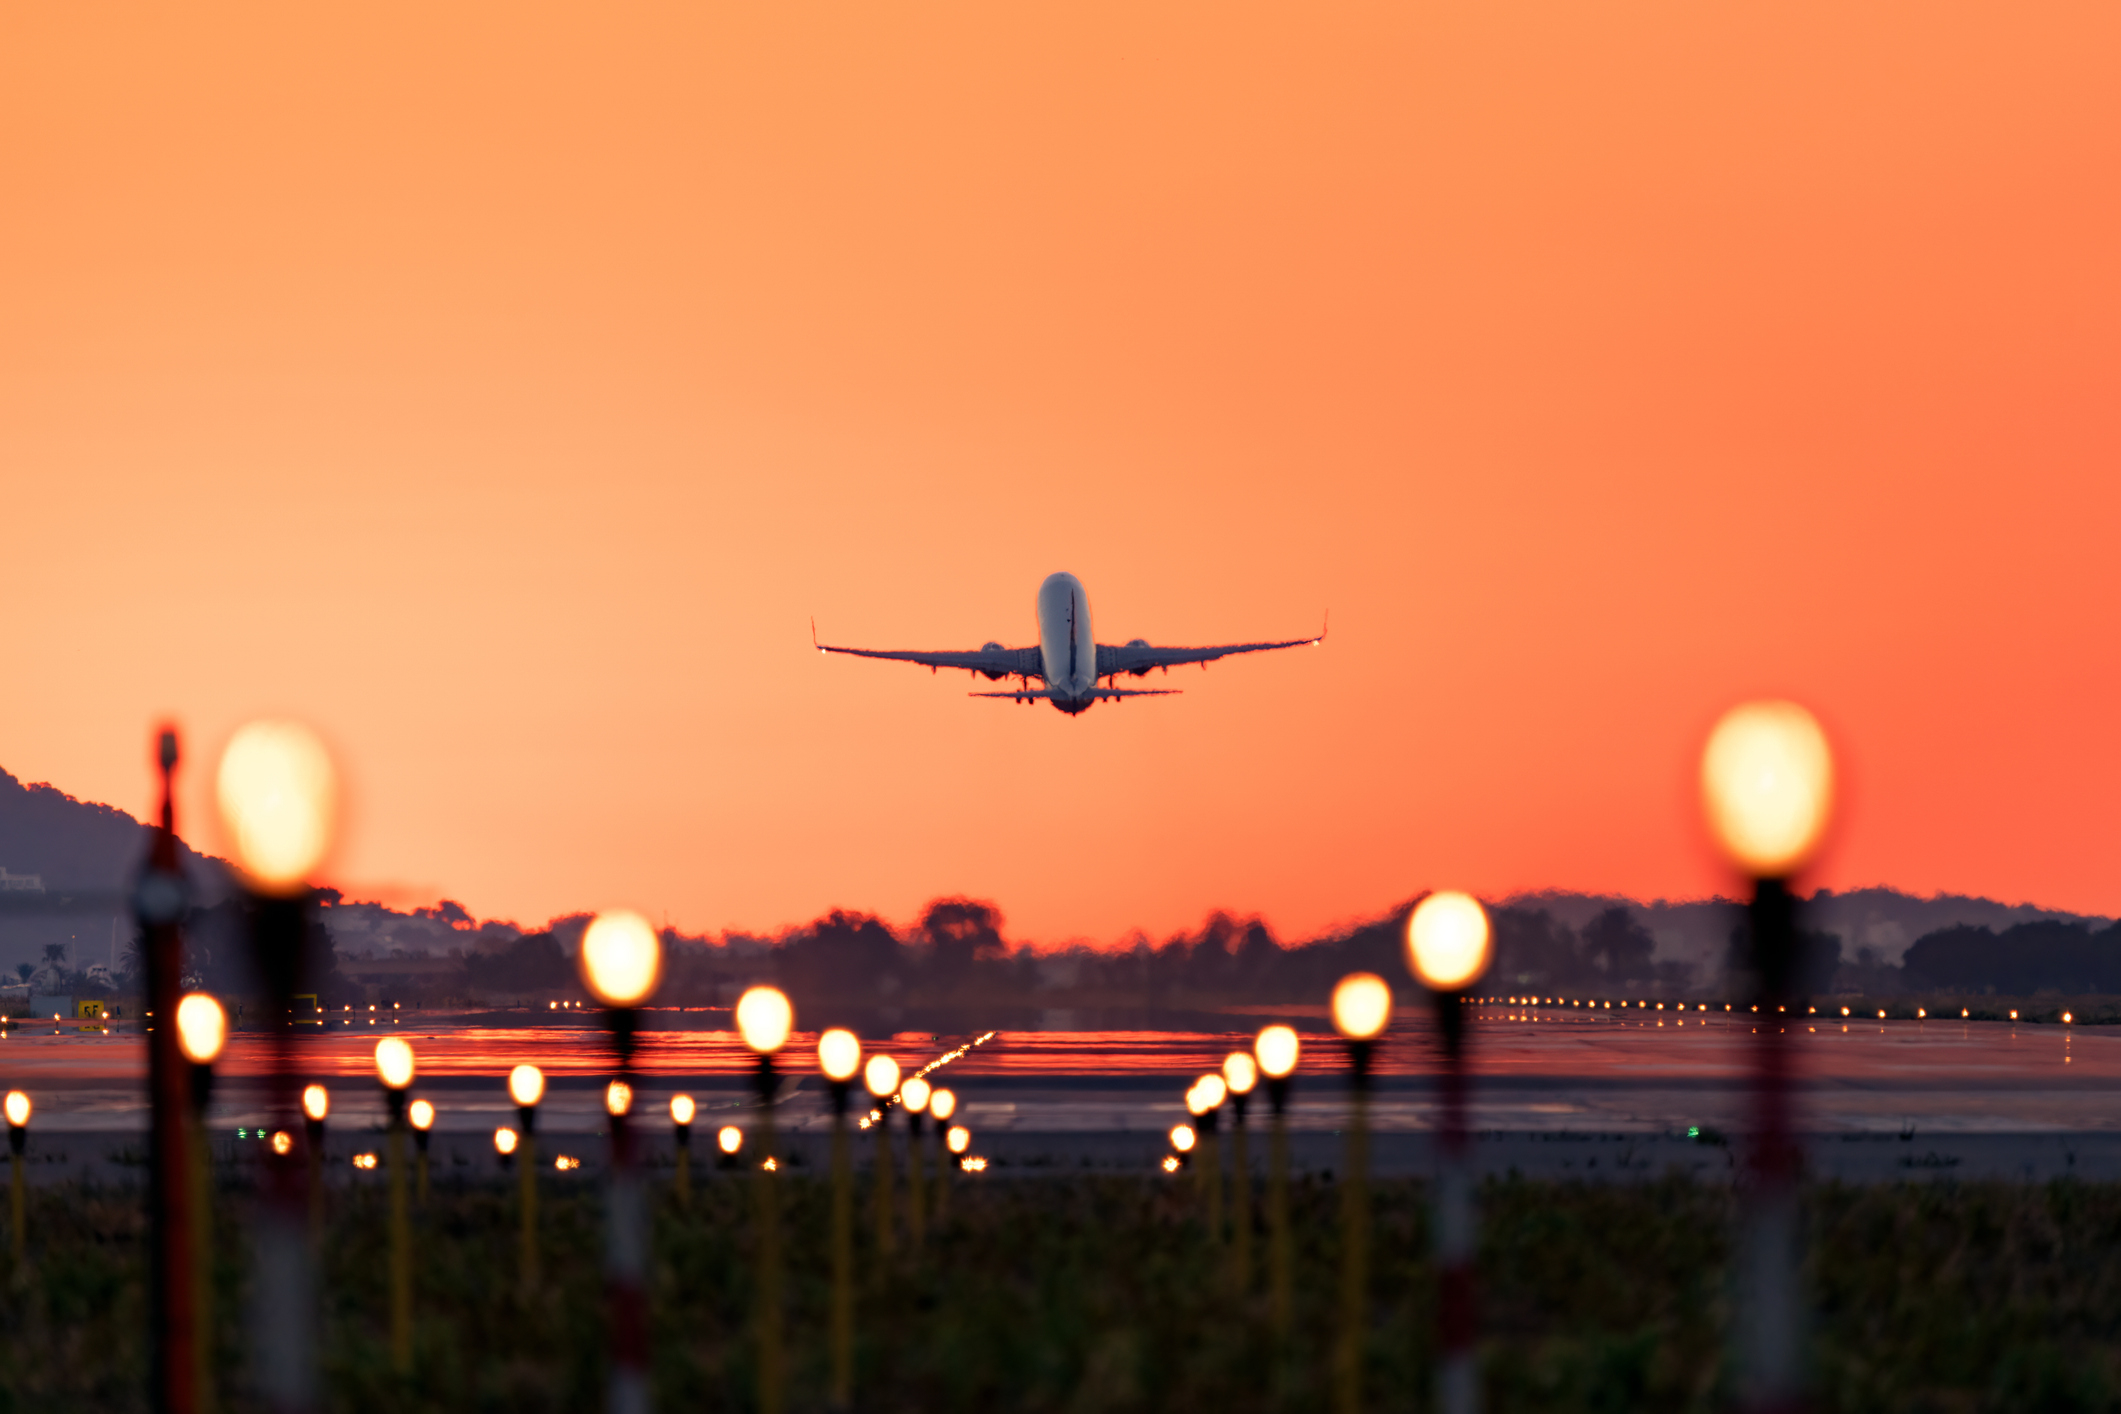 An airplane taking off at dusk with lights along the runway